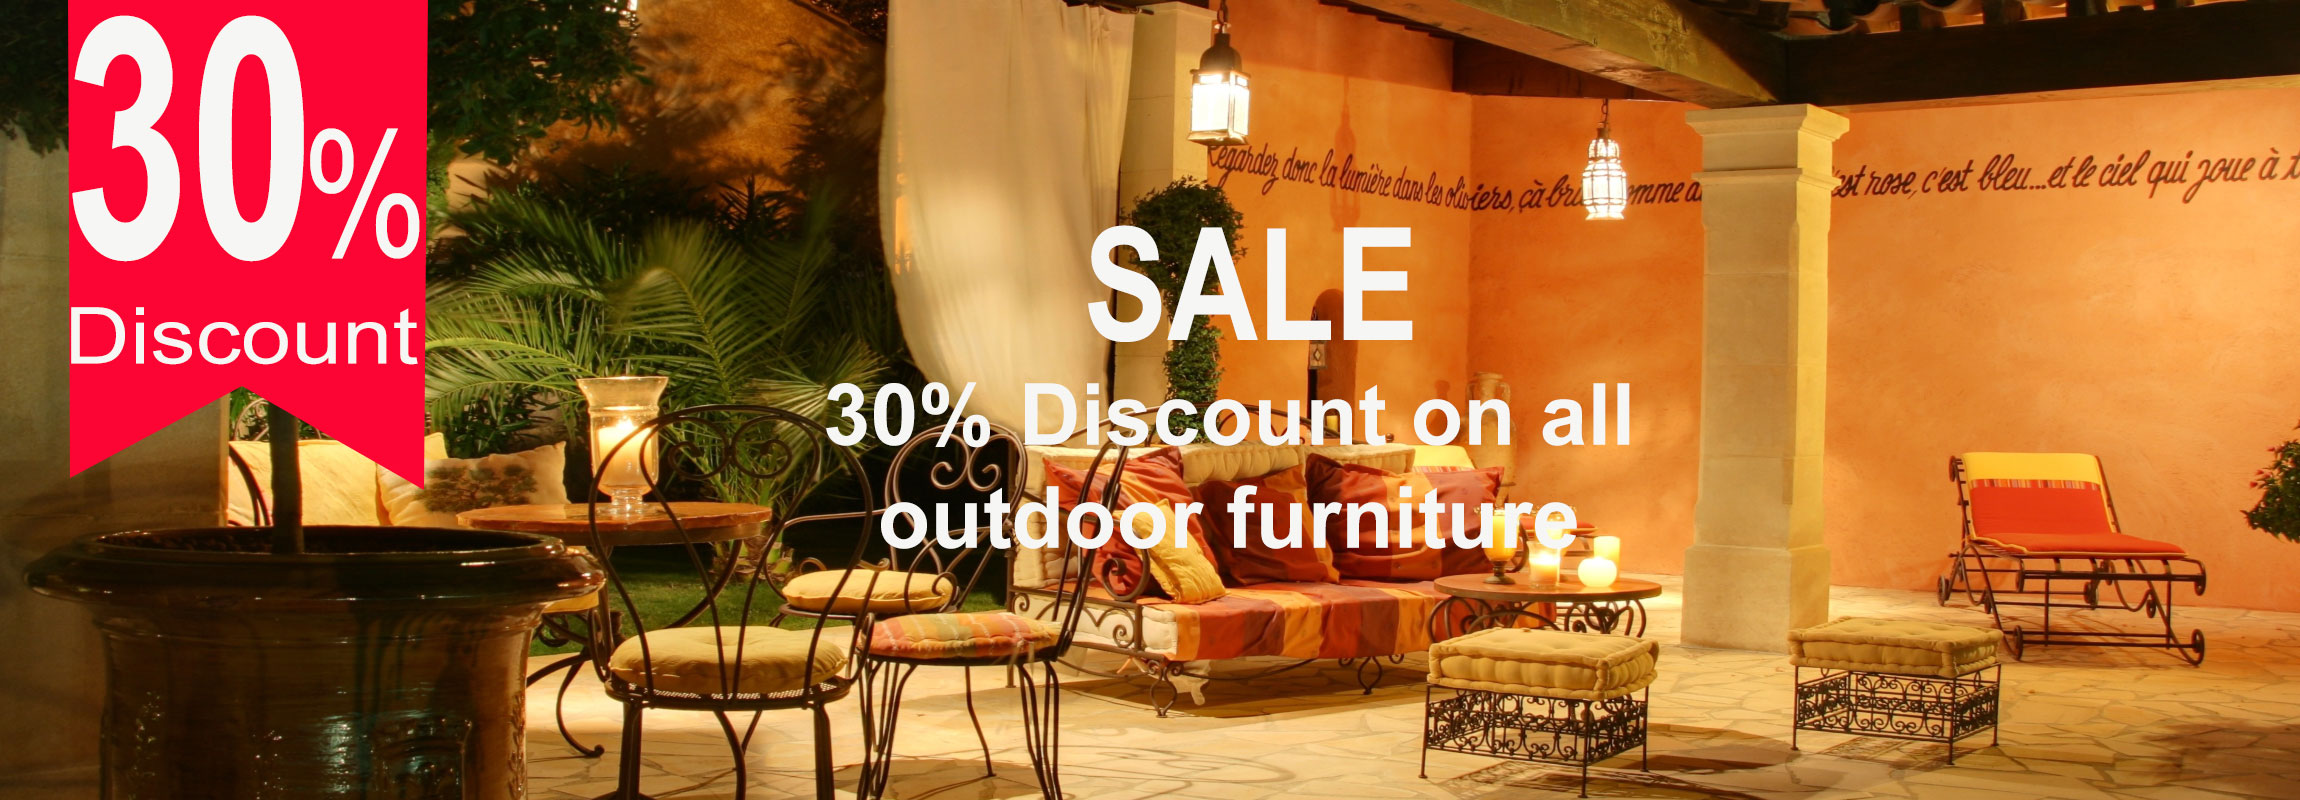 30% Discount on all outdoor furniture